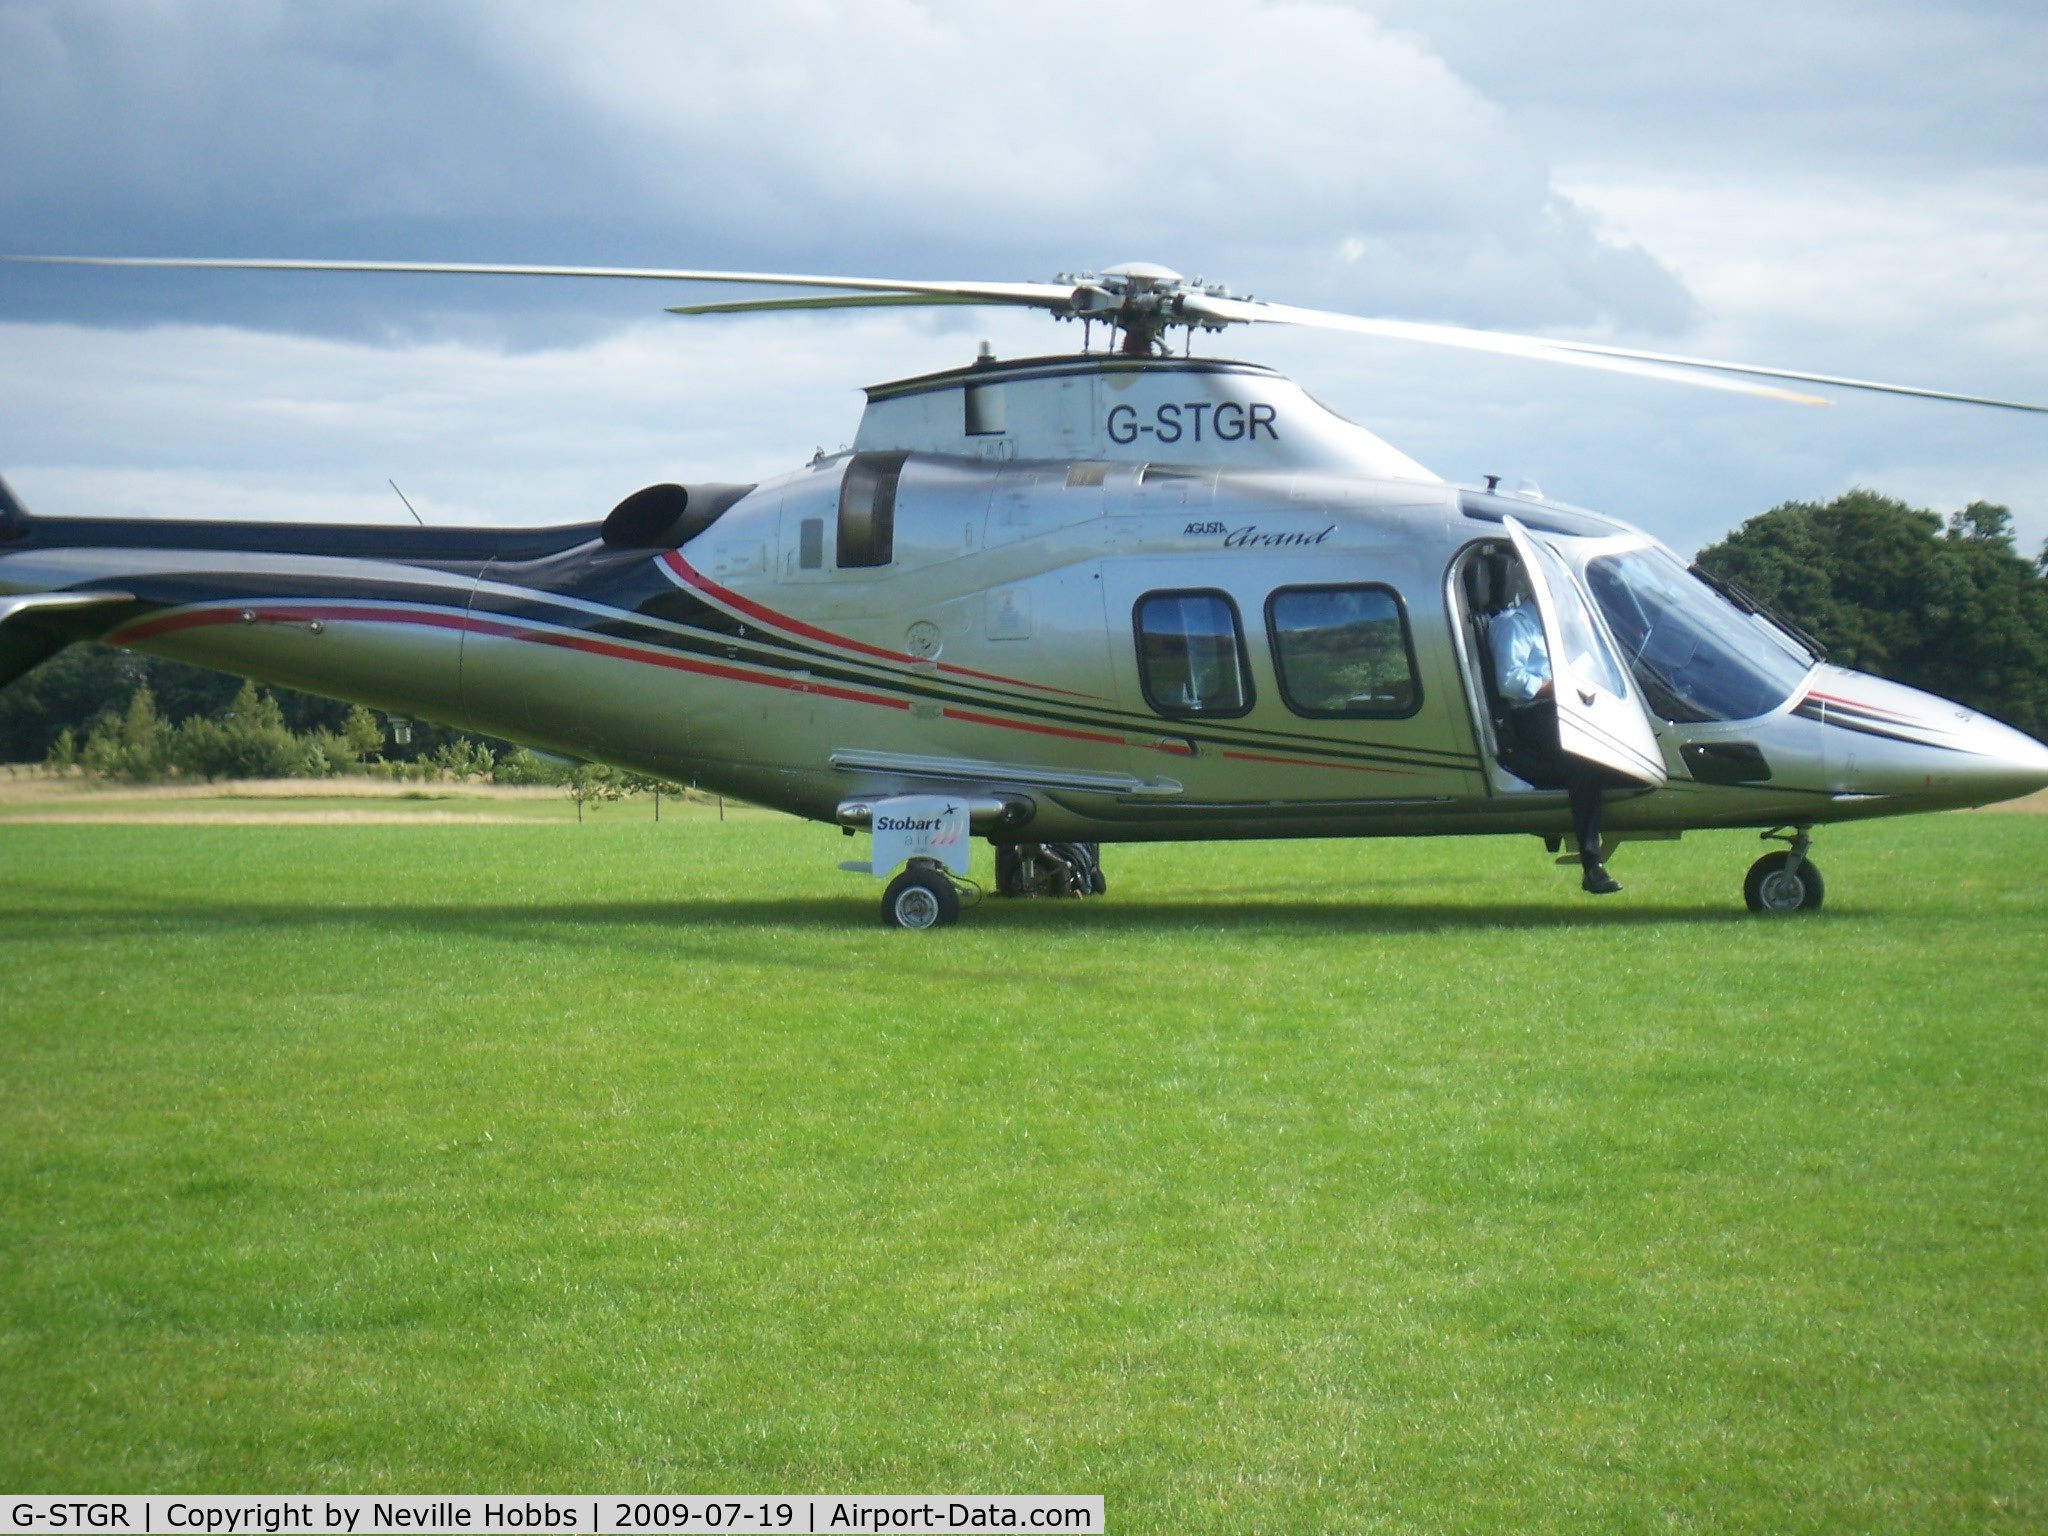 G-STGR, 2006 Agusta A-109S Grand C/N 22027, Owned by Stobart Group